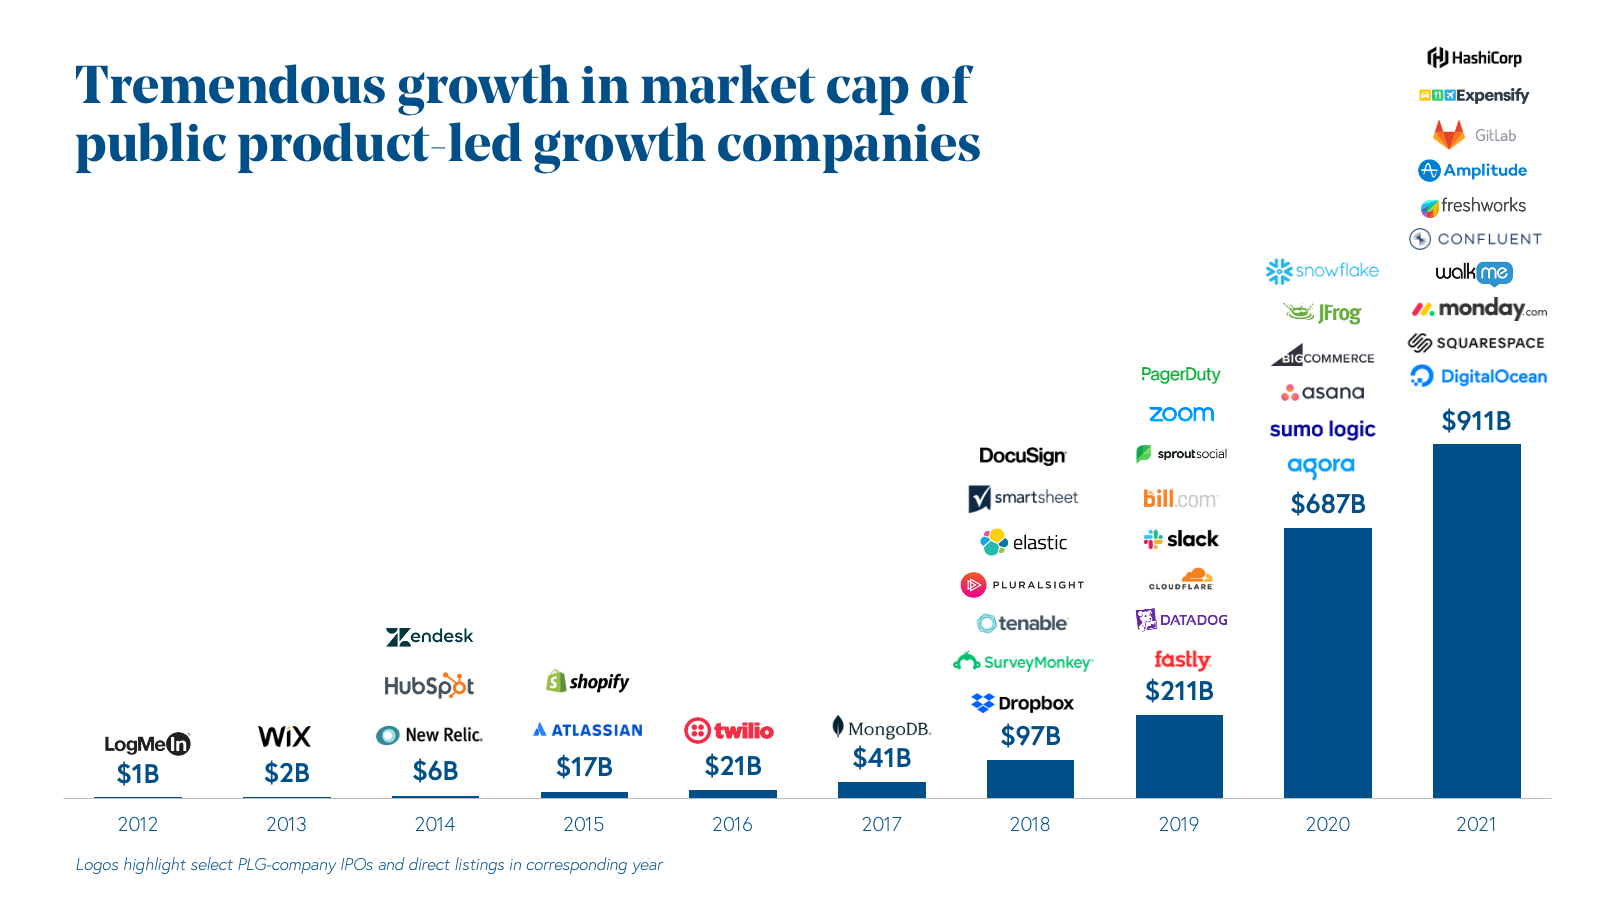 Tremendous growth in market cap of public product-led growth companies